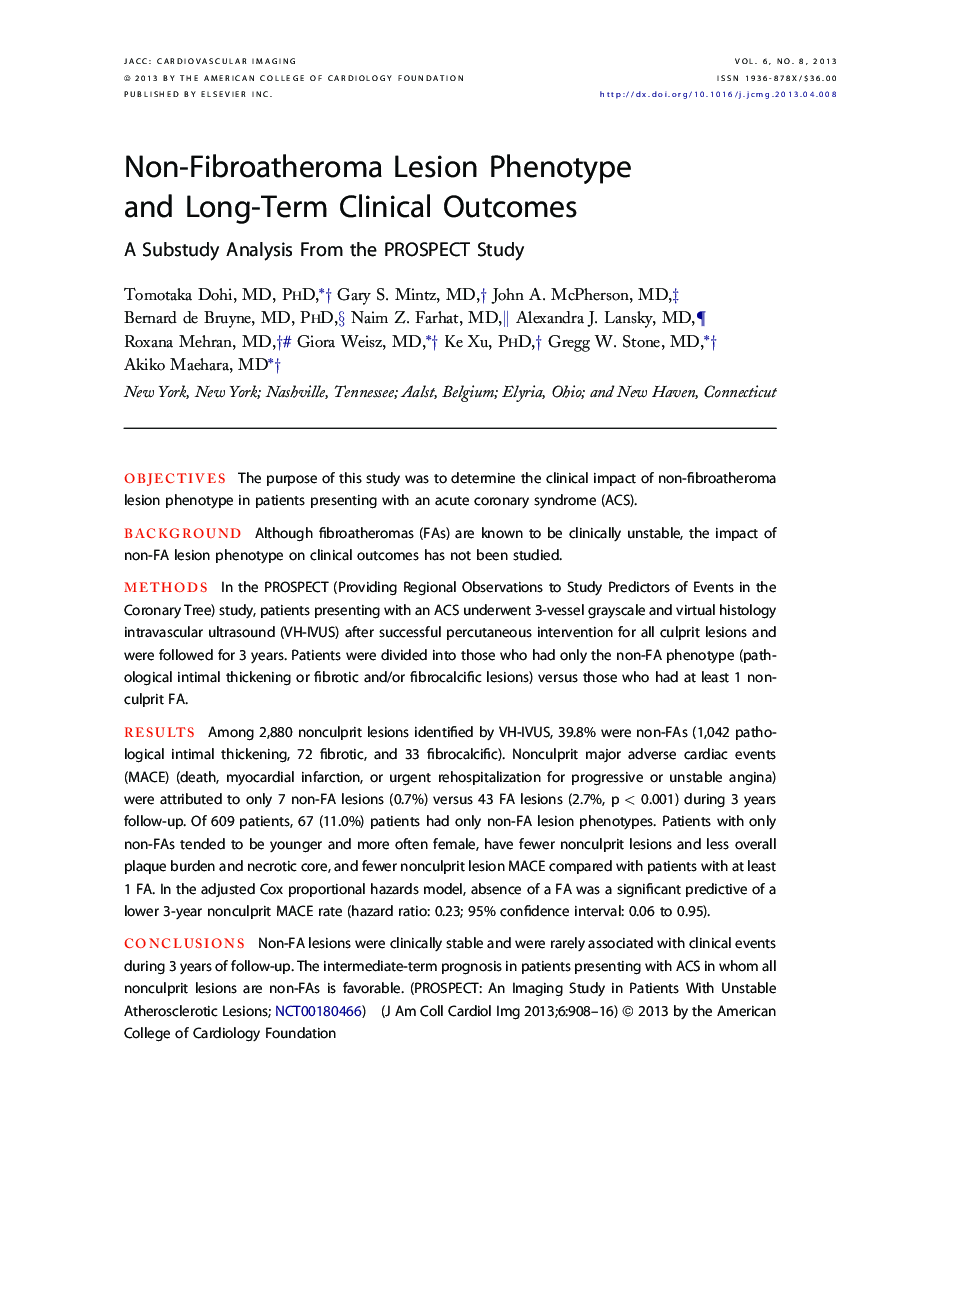 Non-Fibroatheroma Lesion Phenotype and Long-Term Clinical Outcomes : A Substudy Analysis From the PROSPECT Study